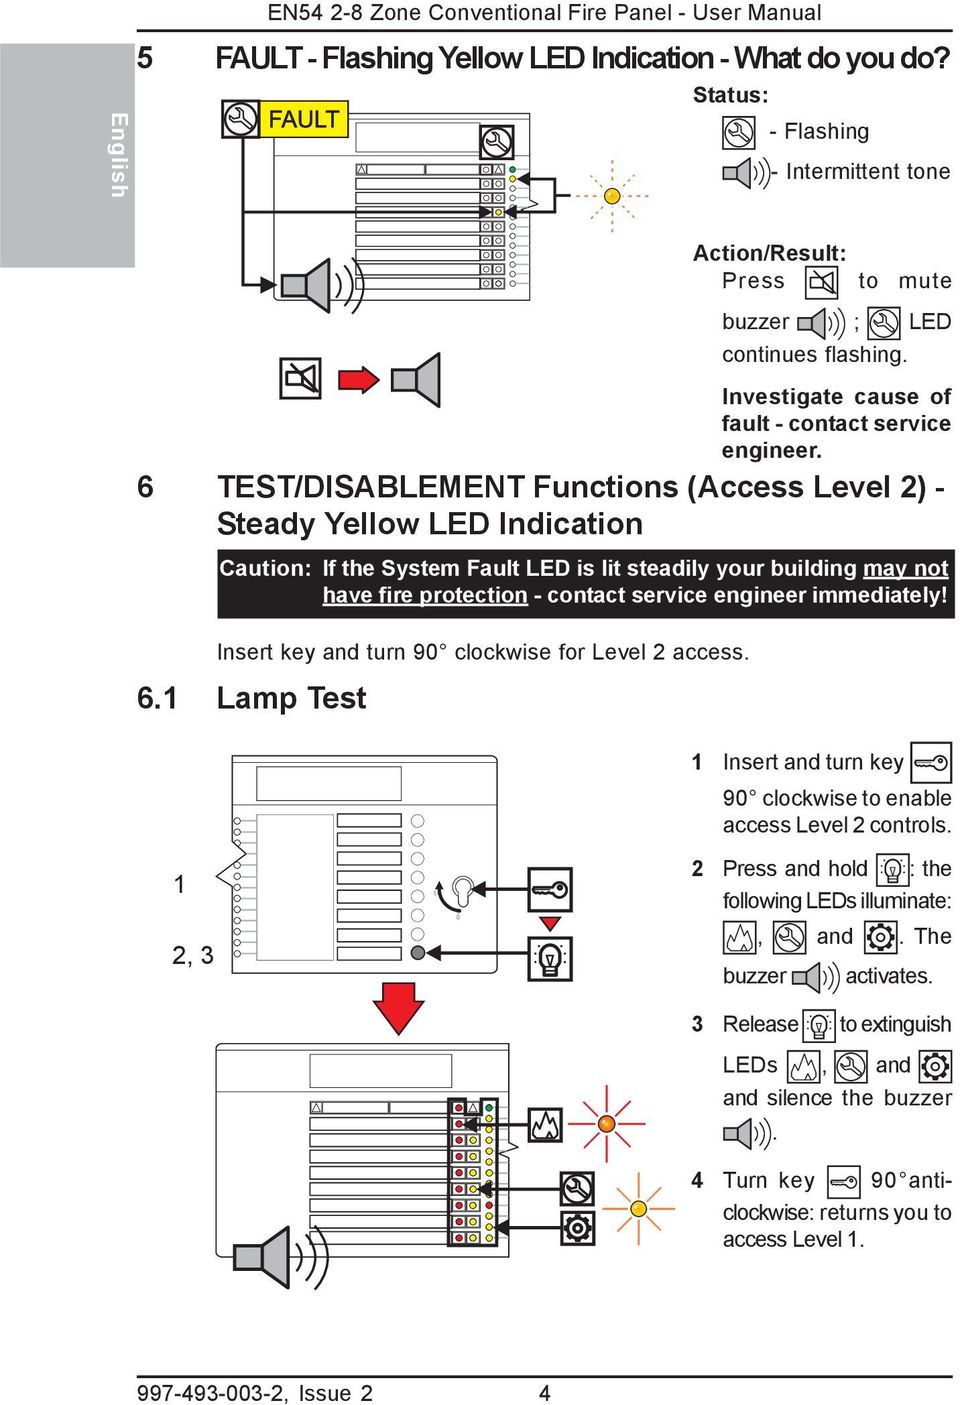 6 TEST/DISABLEMENT Functions (Access Level ) - Steady Yellow LED Indication Caution: If the System Fault LED is lit steadily your building may not have fire protection - contact service engineer